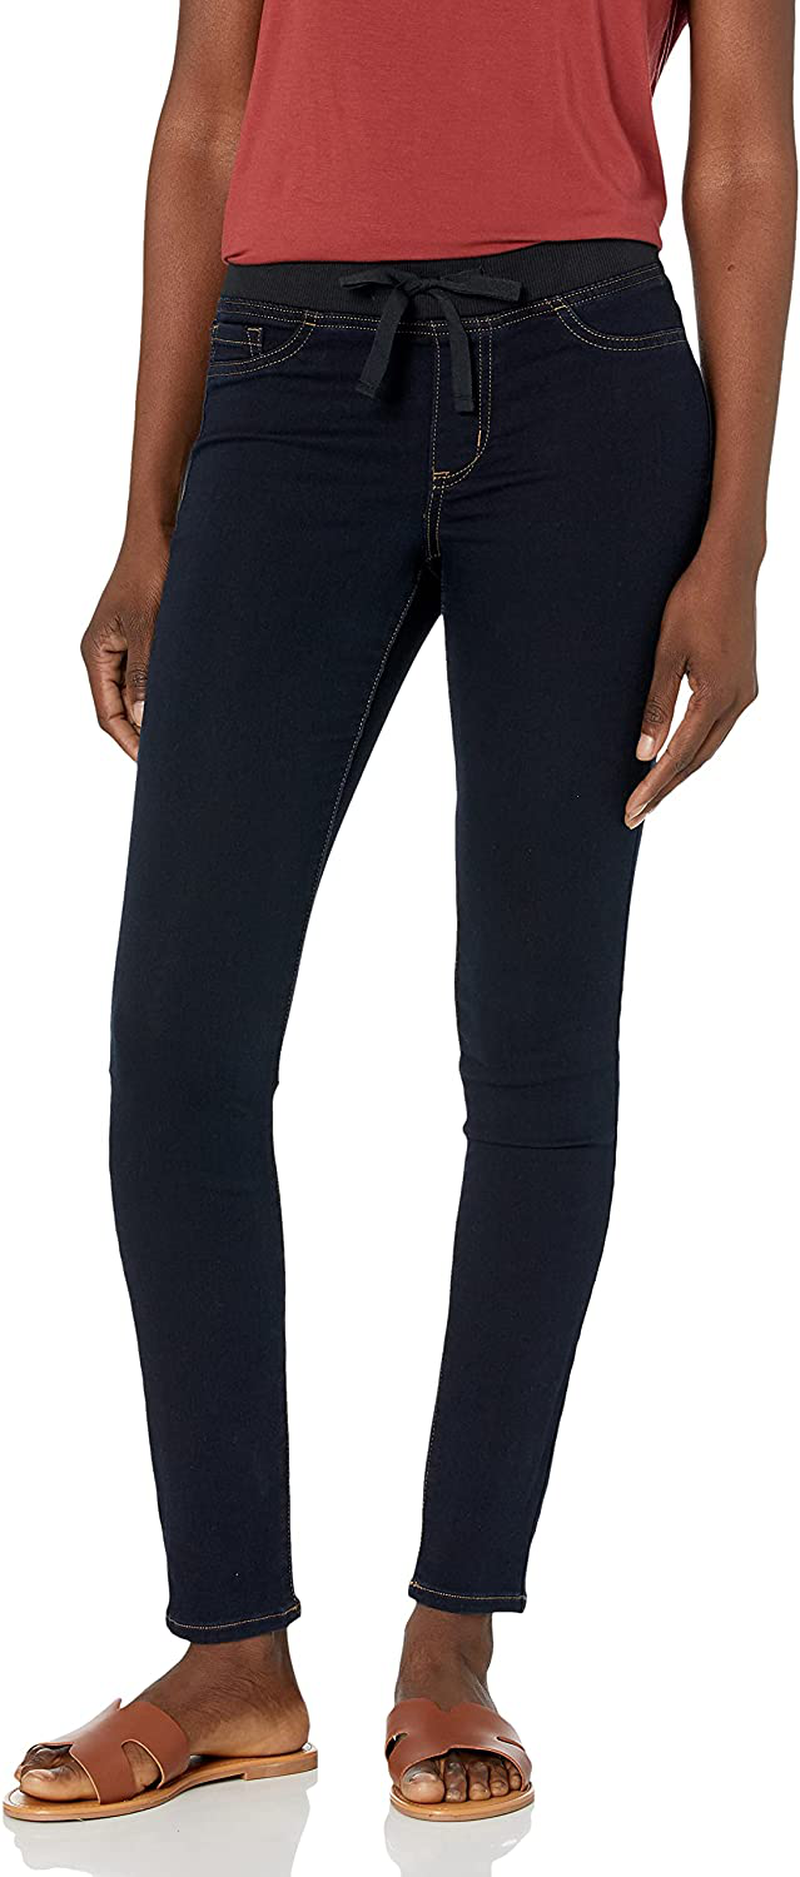 l.e.i. Women's Dorm Pull on Jegging with Tie Detailing in Knit Denim